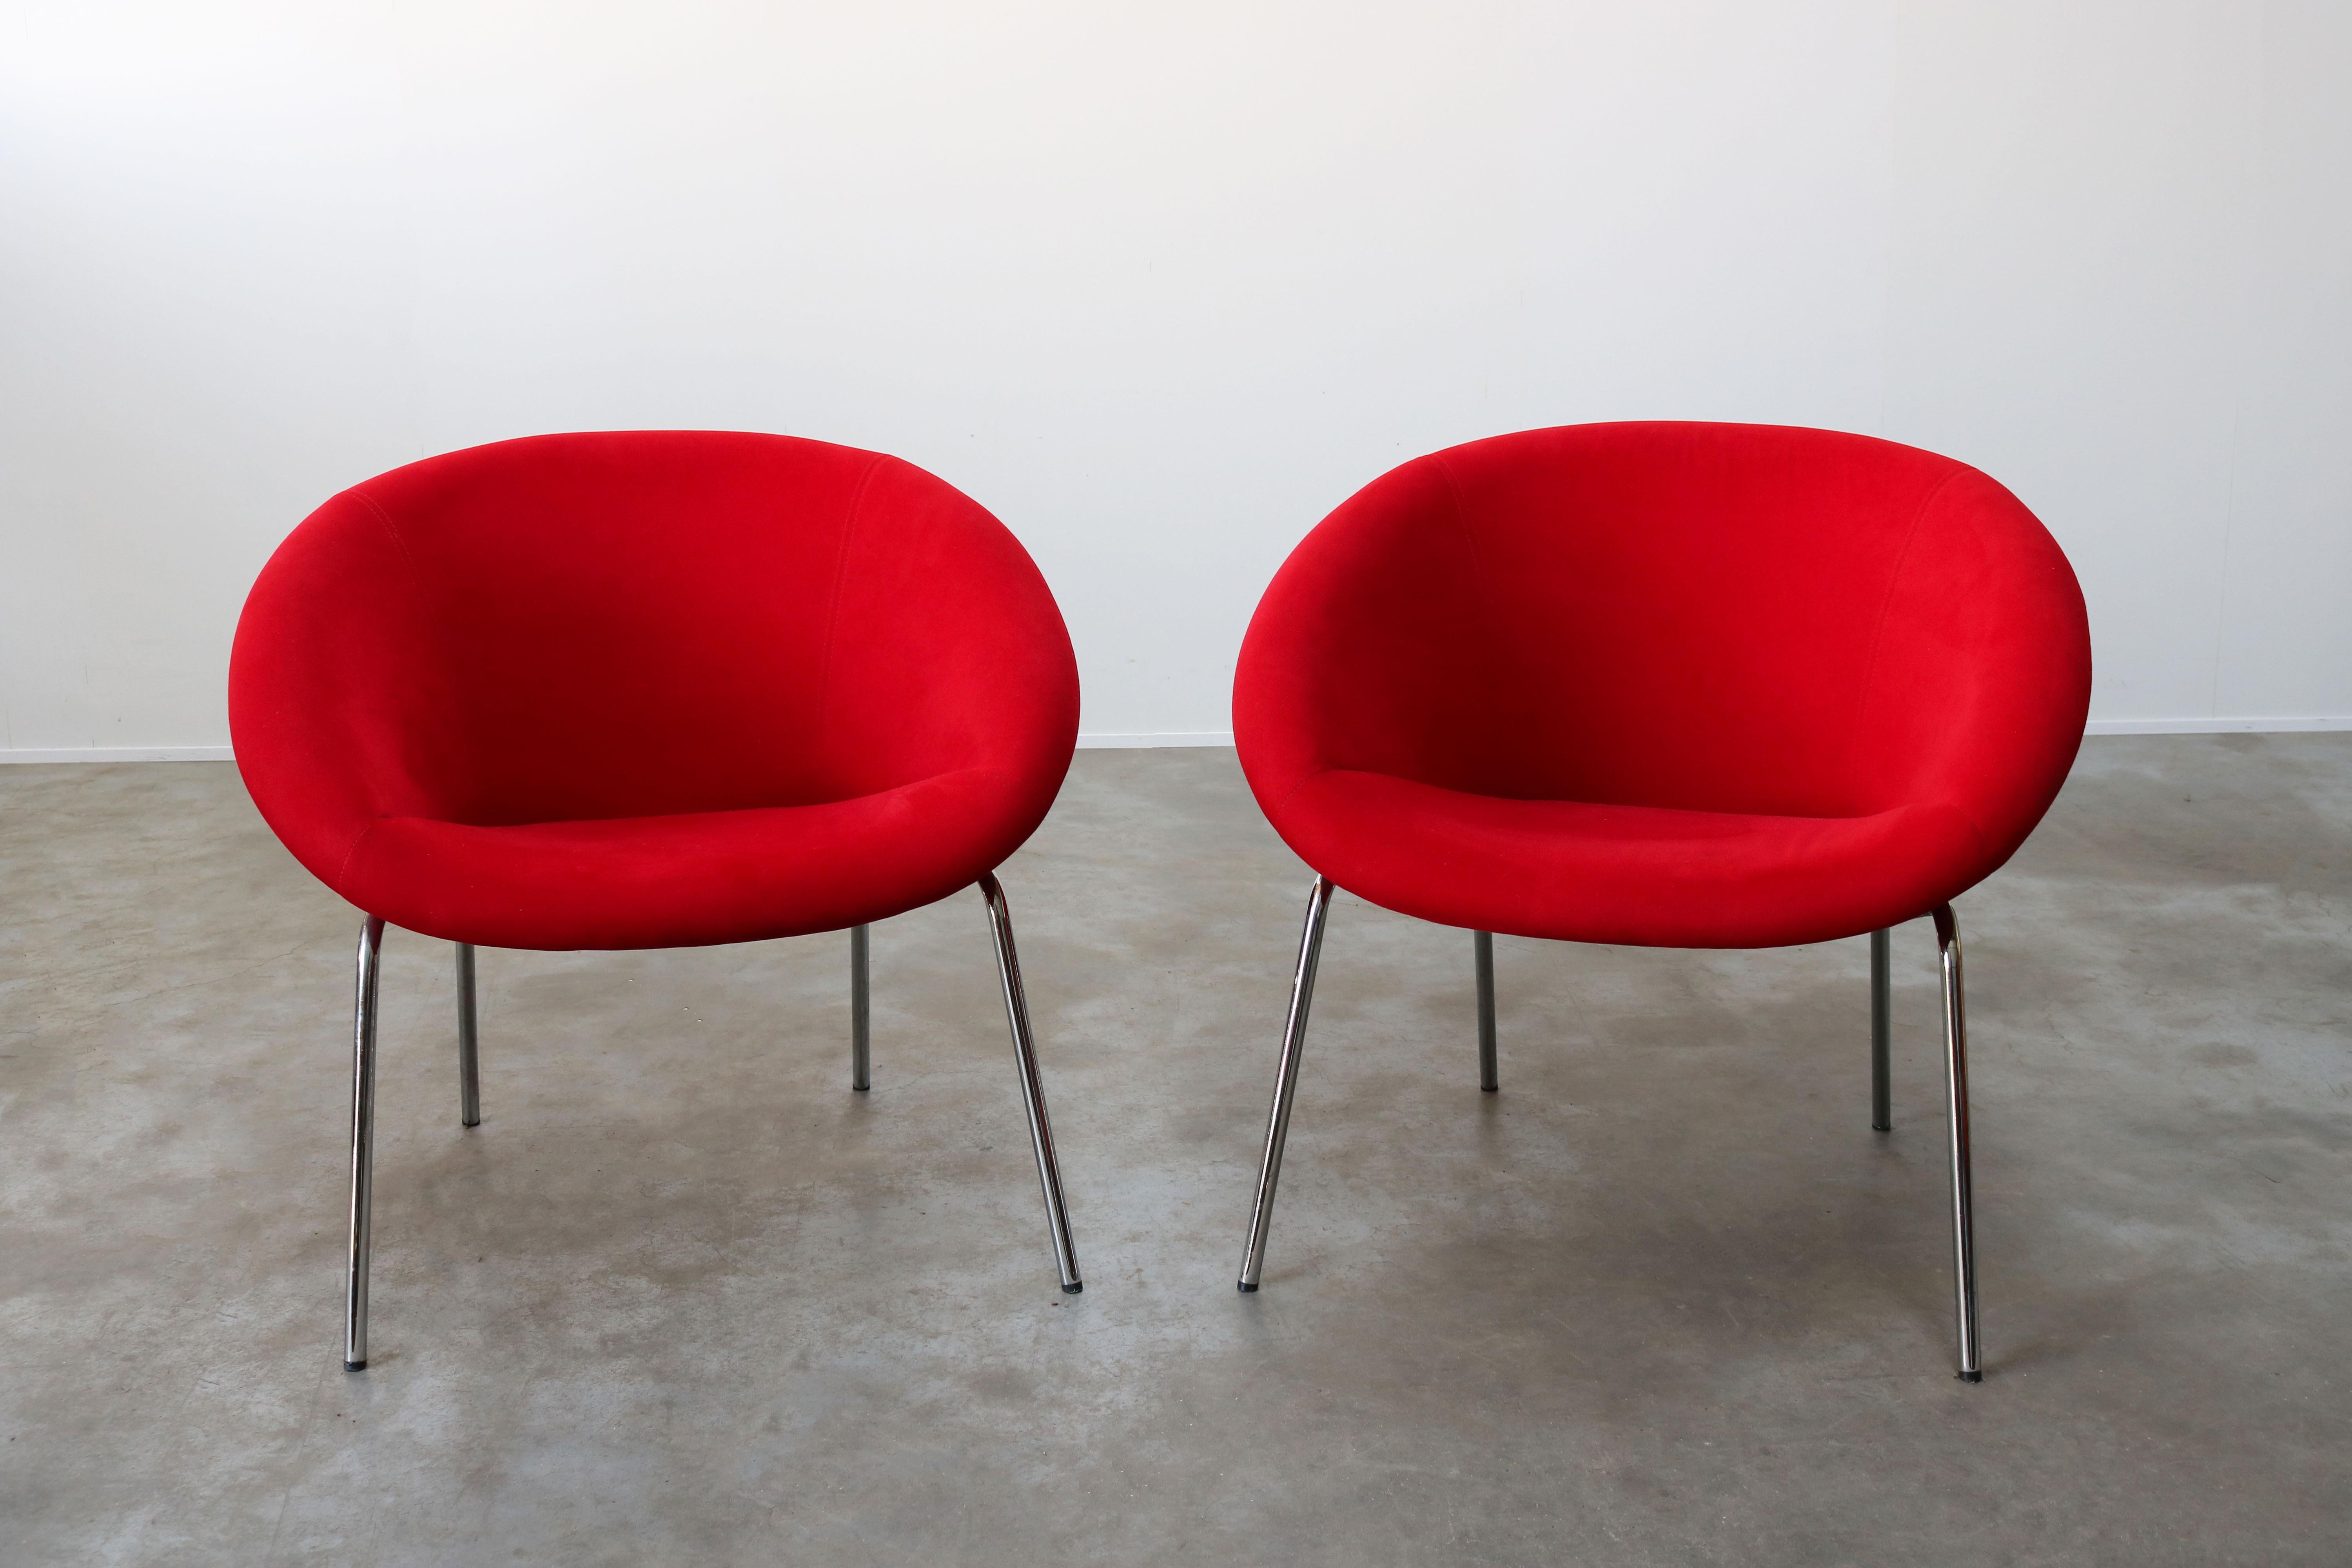 Wonderful pair of Model 369 lounge chairs in Red by Walter Knoll. The chairs are made of a plastic shell, coated with foam and fabric on a chrome frame. Very comfortable model in a fifties pop art design style. Chairs are in near perfect vintage